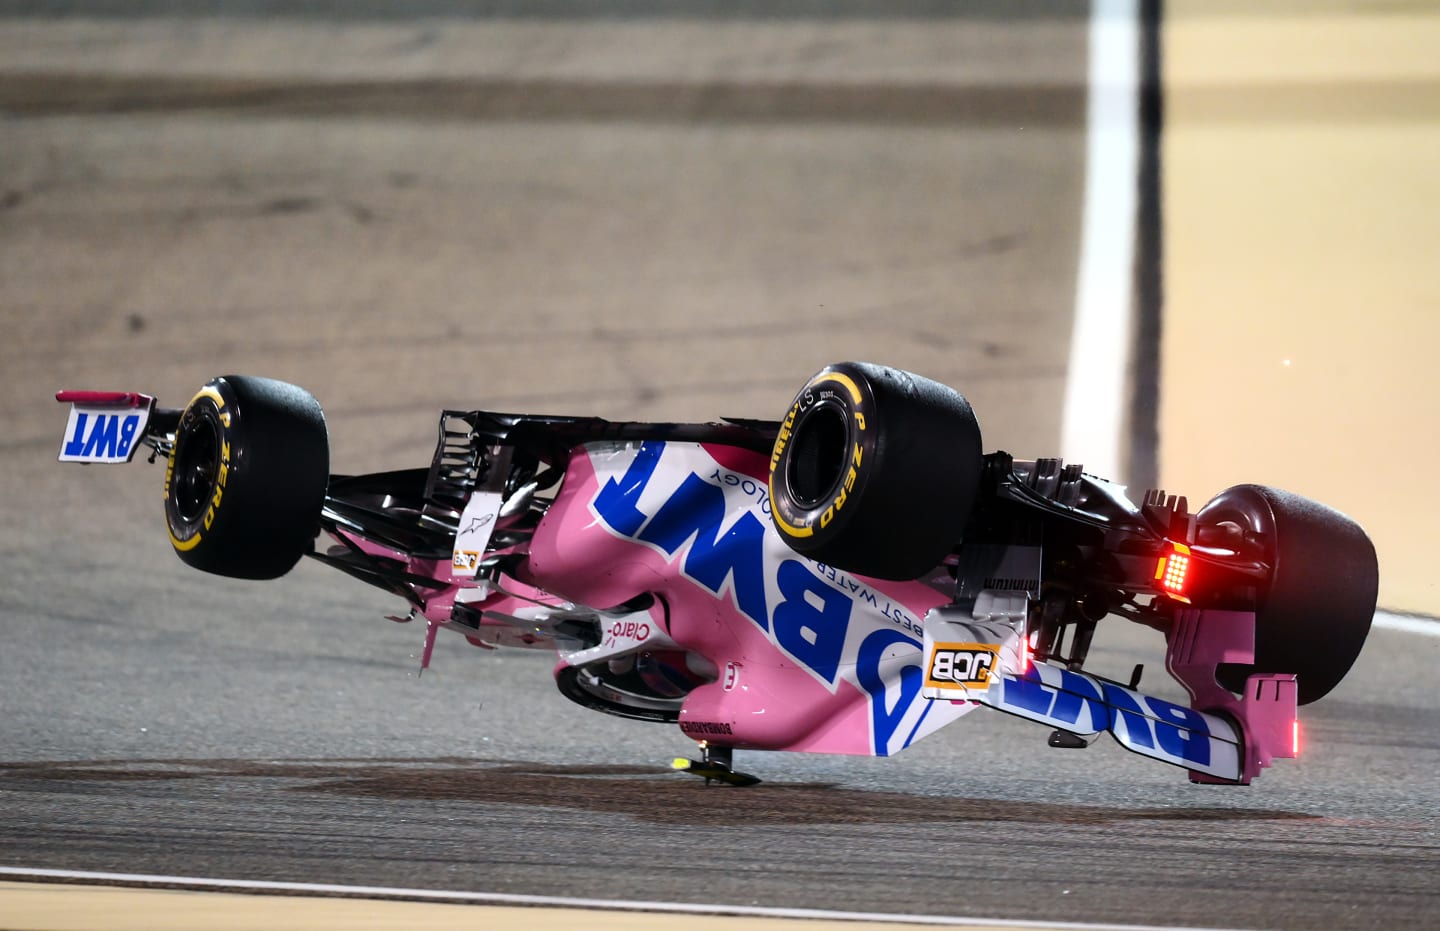 BAHRAIN, BAHRAIN - NOVEMBER 29: Lance Stroll of Canada driving the (18) Racing Point RP20 Mercedes is launched upside down following a crash during the F1 Grand Prix of Bahrain at Bahrain International Circuit on November 29, 2020 in Bahrain, Bahrain. (Photo by Clive Mason - Formula 1/Formula 1 via Getty Images)